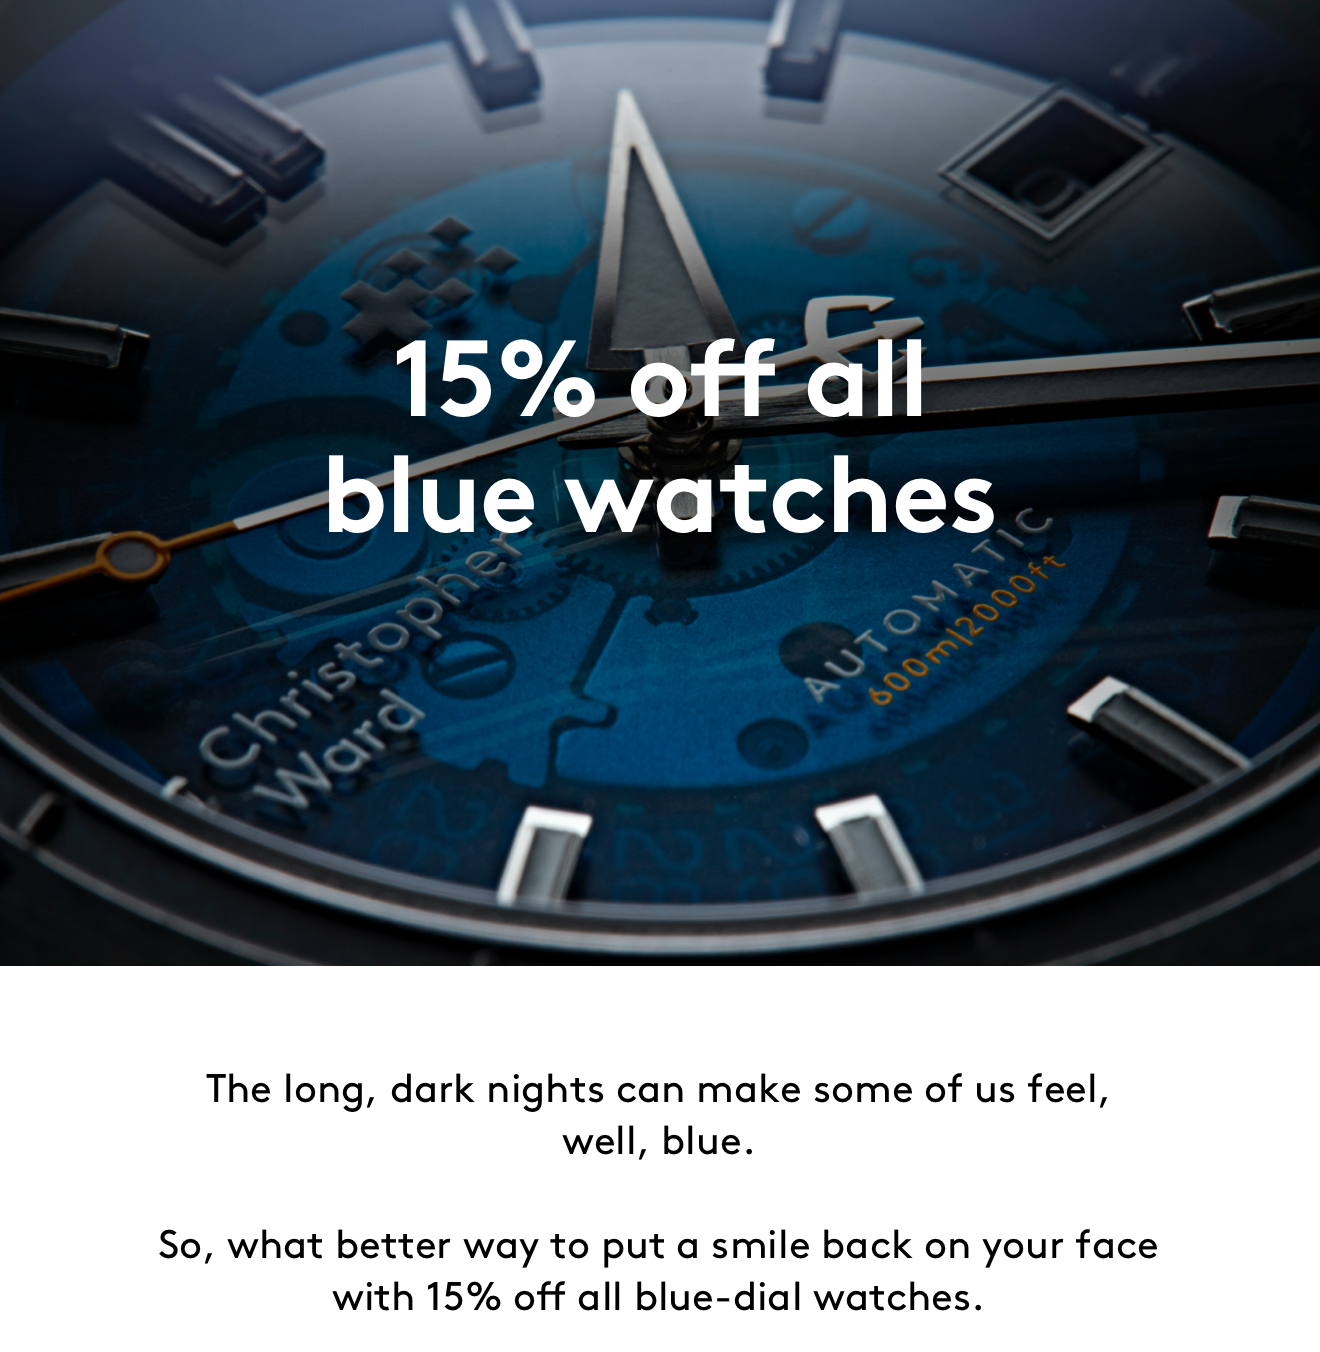 15% off all blue watches